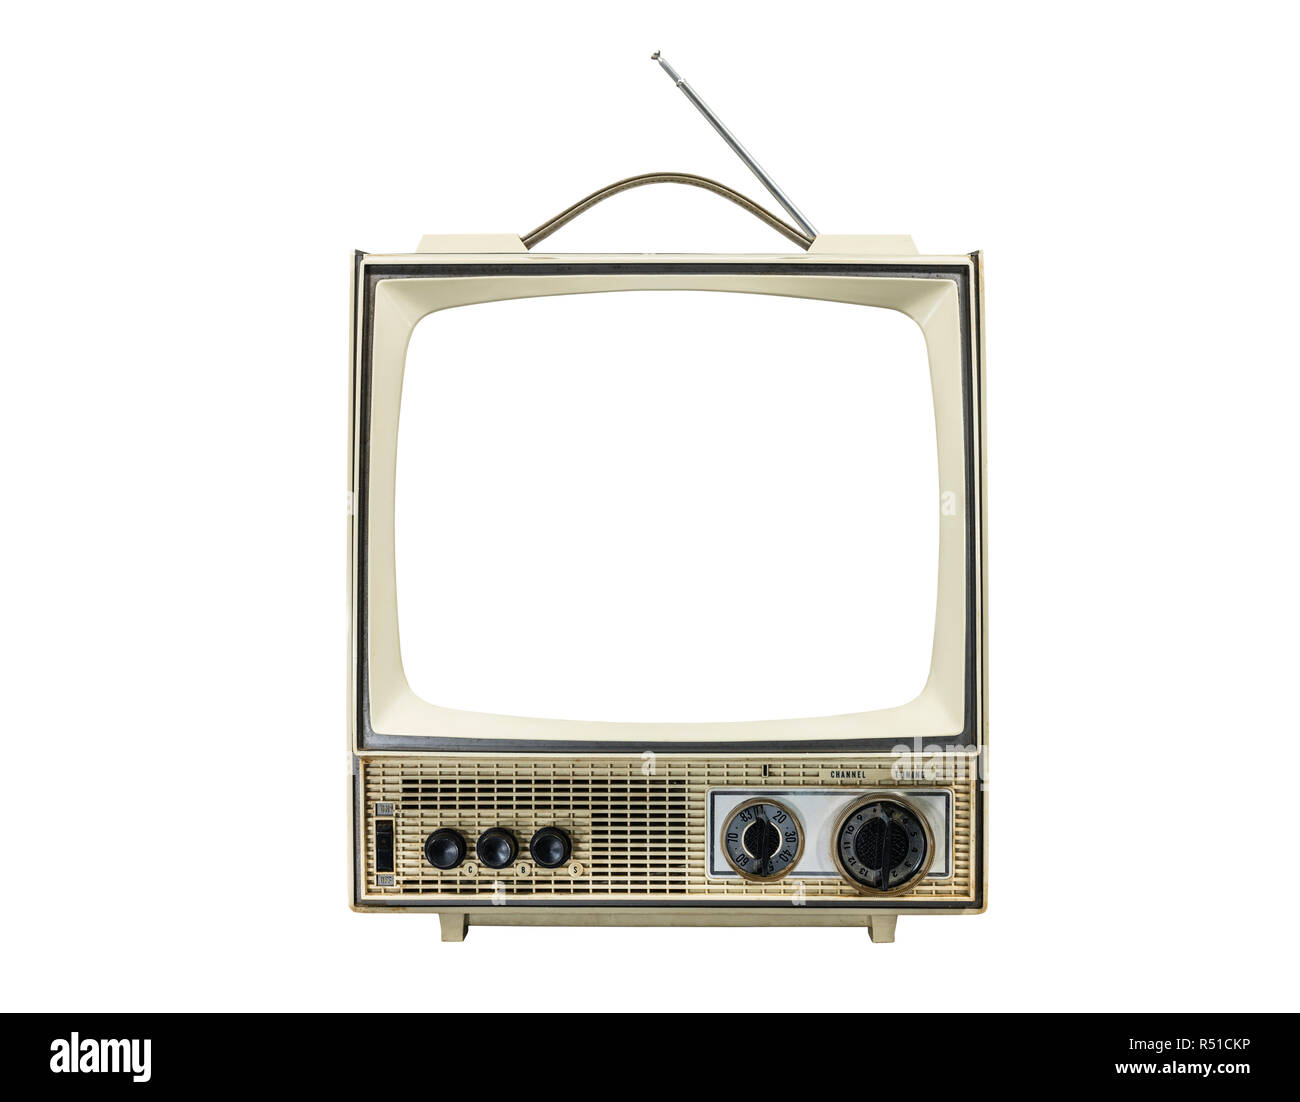 Grungy vintage portable television isolated on white with cut out screen. Stock Photo